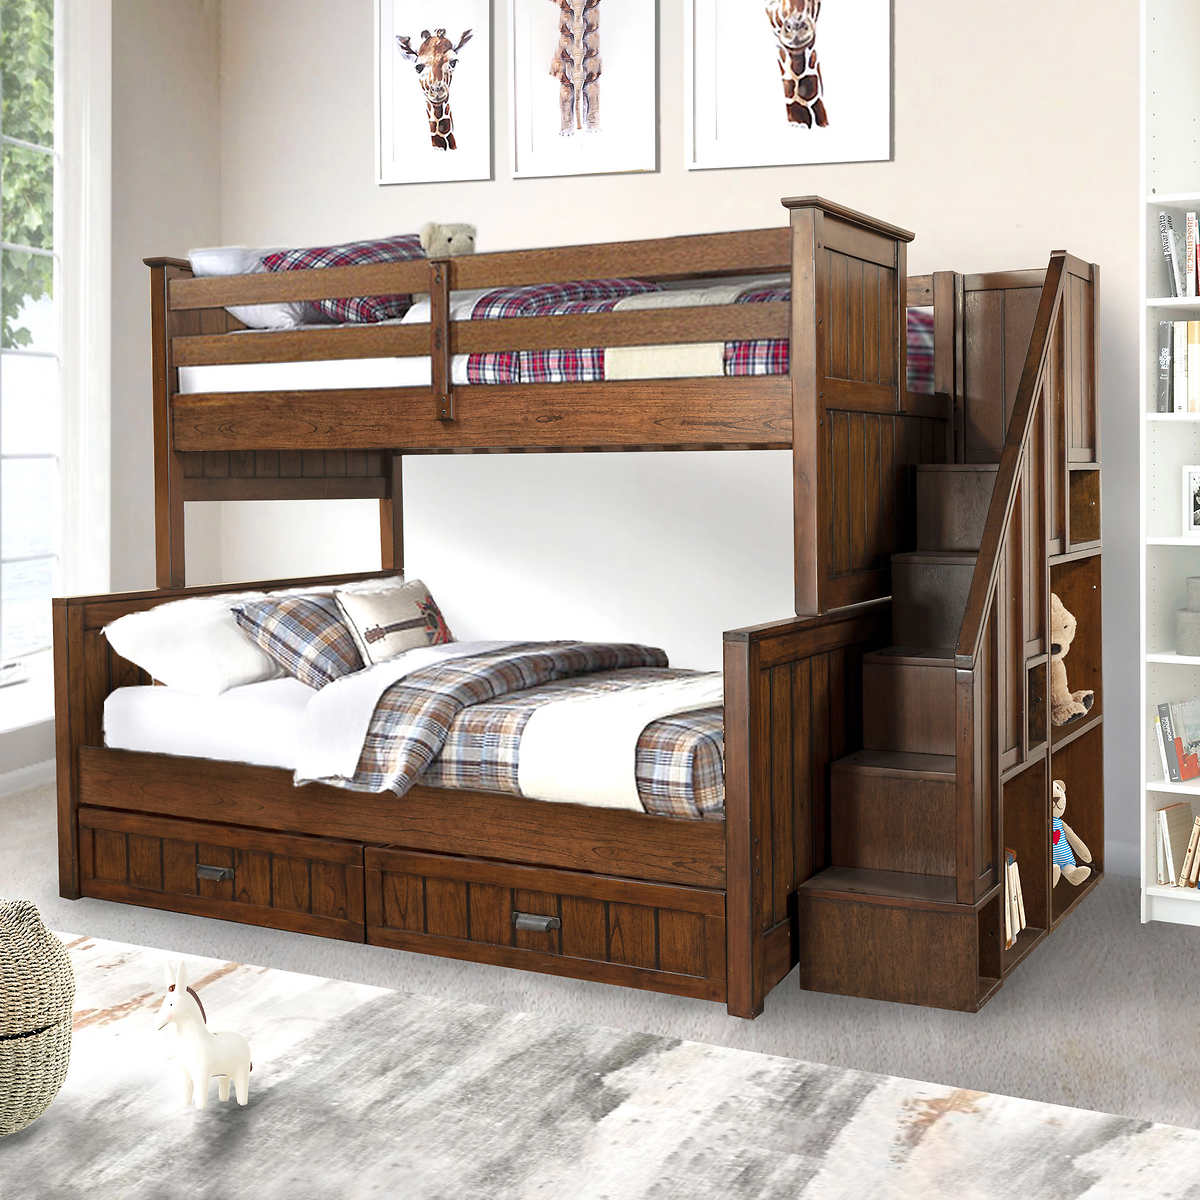 Maddox Twin Over Double Bunk Bed Costco, Merritt Bunk Bed